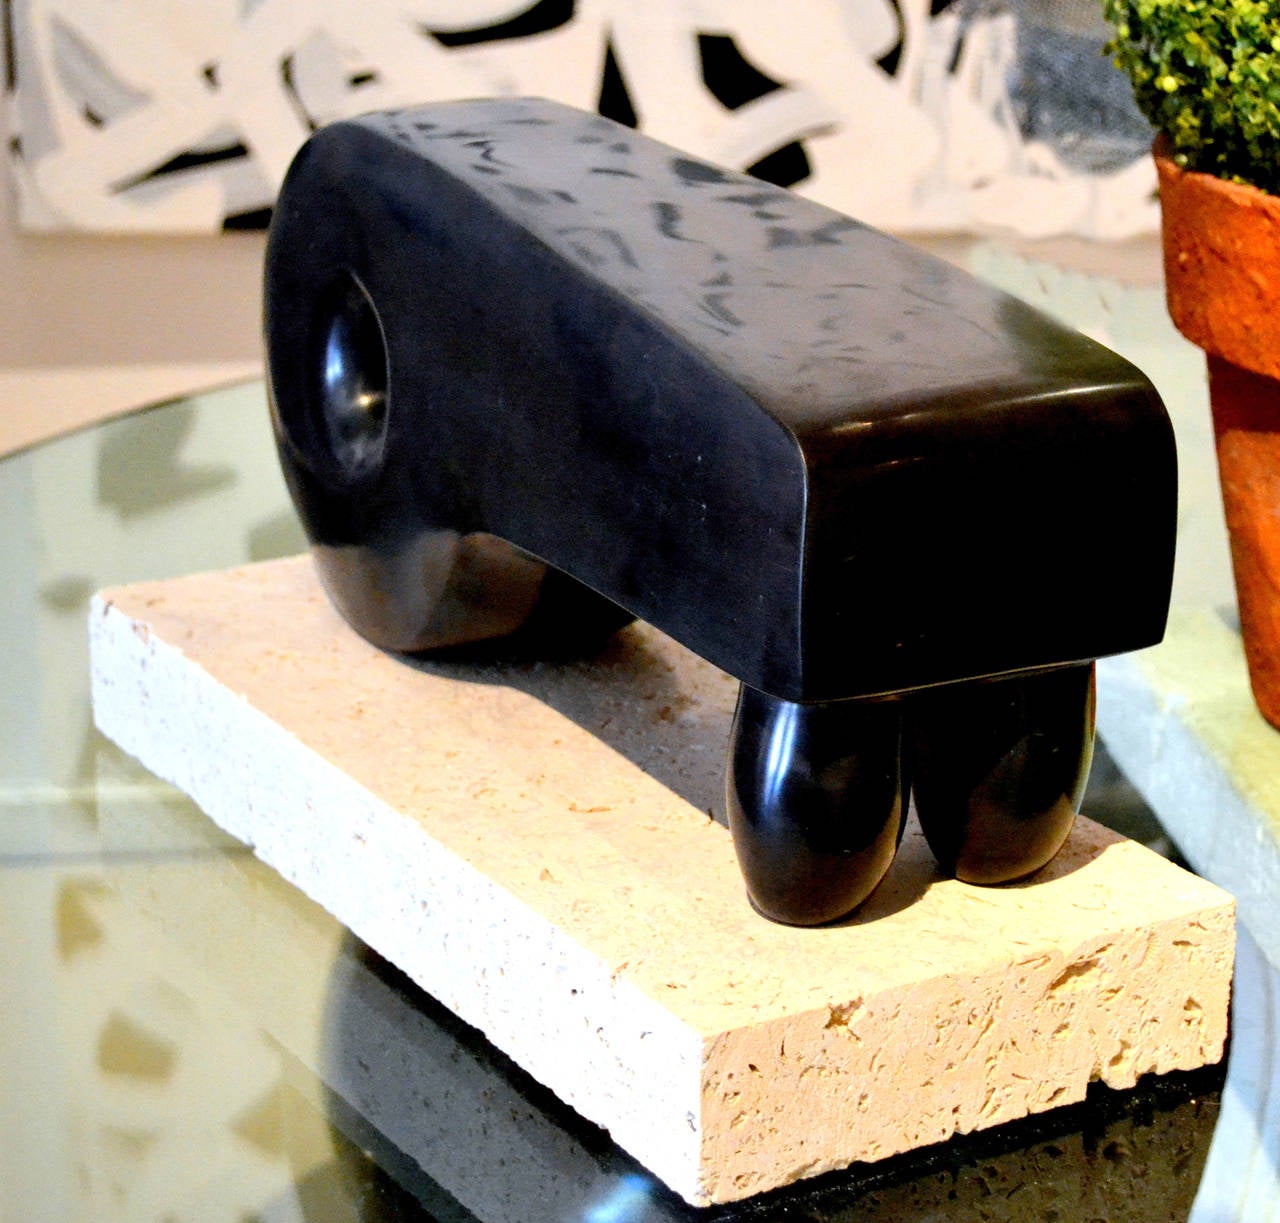 One might instantly assume Henry Moore or Brancusi, but instead this beautiful abstract sculpture is by highly collected California artist Scott Donadio (b. 1961). Carved from a single block of Belgium black marble, this sculpture will make a strong